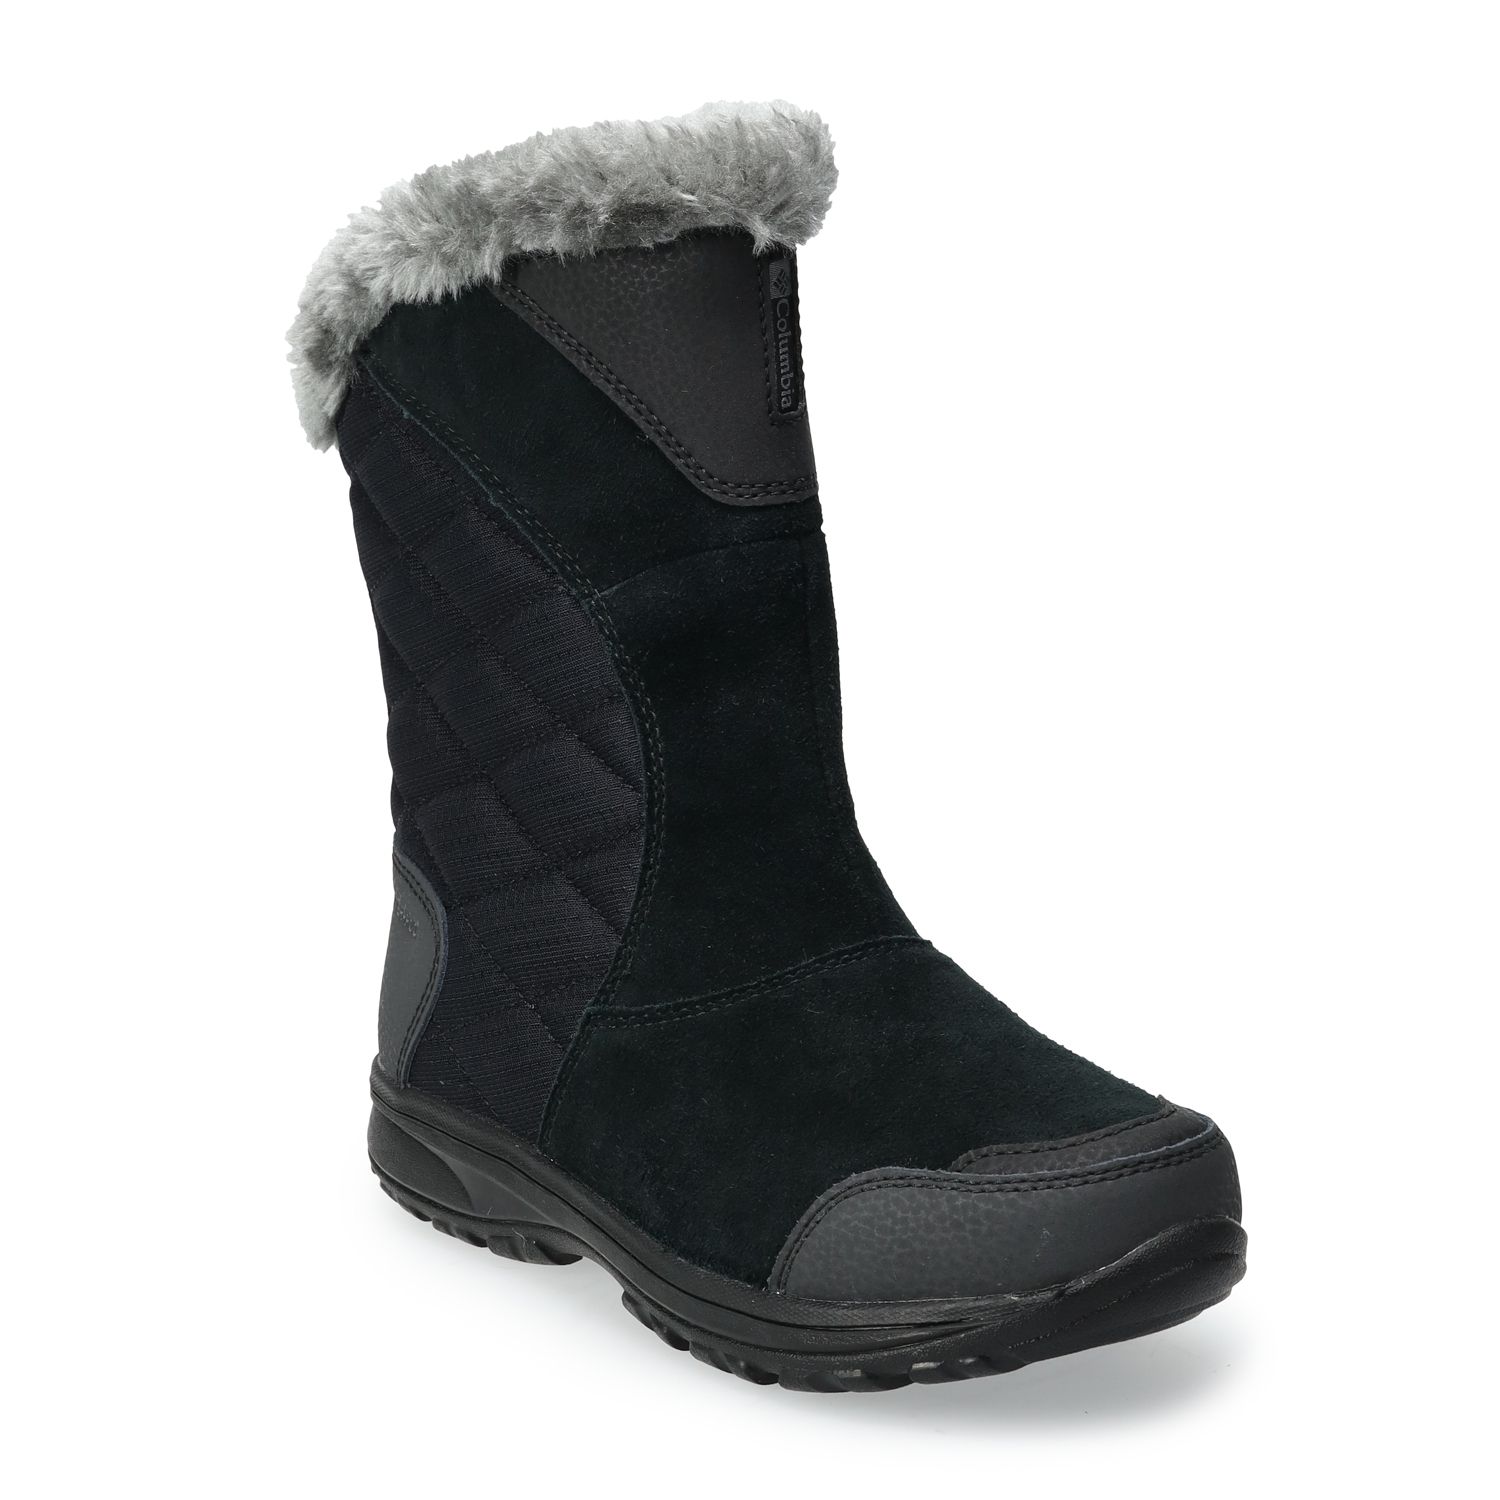 winter boots by columbia